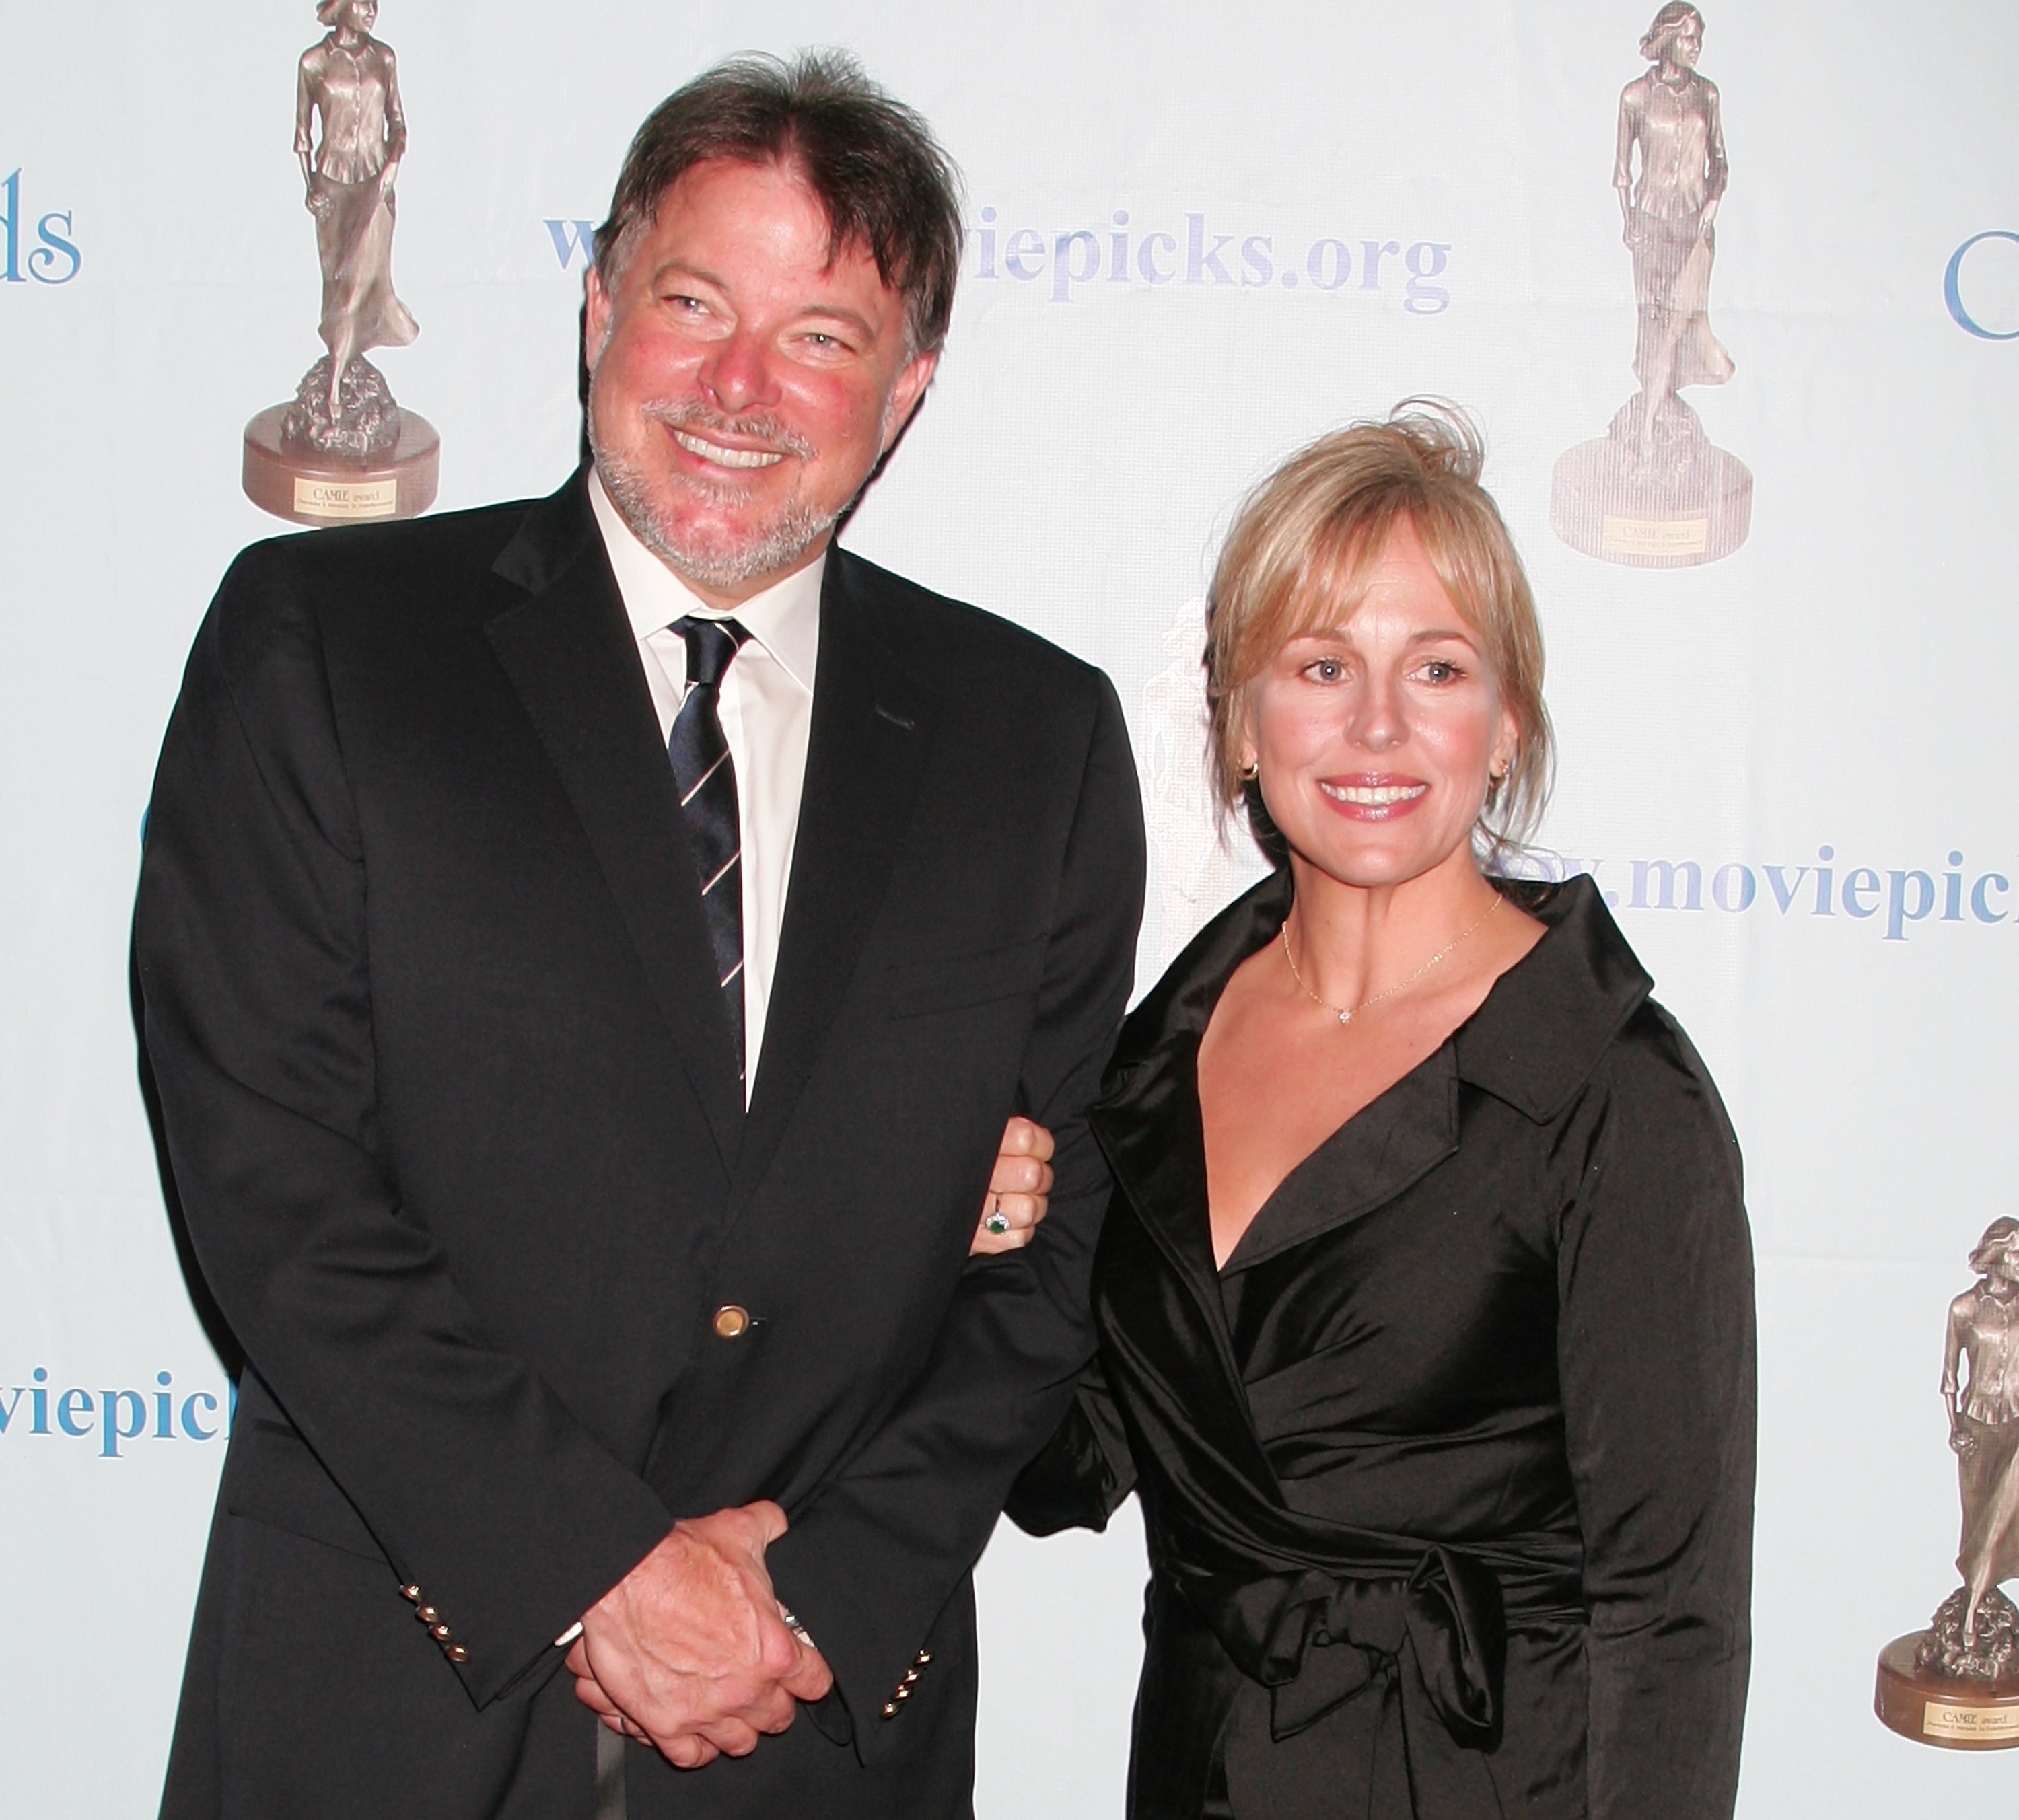 Jonathan Frakes and Genie Francis at the Camie Awards on May 3, 2008, in Beverly Hills, California. | Source: David Livingston/Getty Images